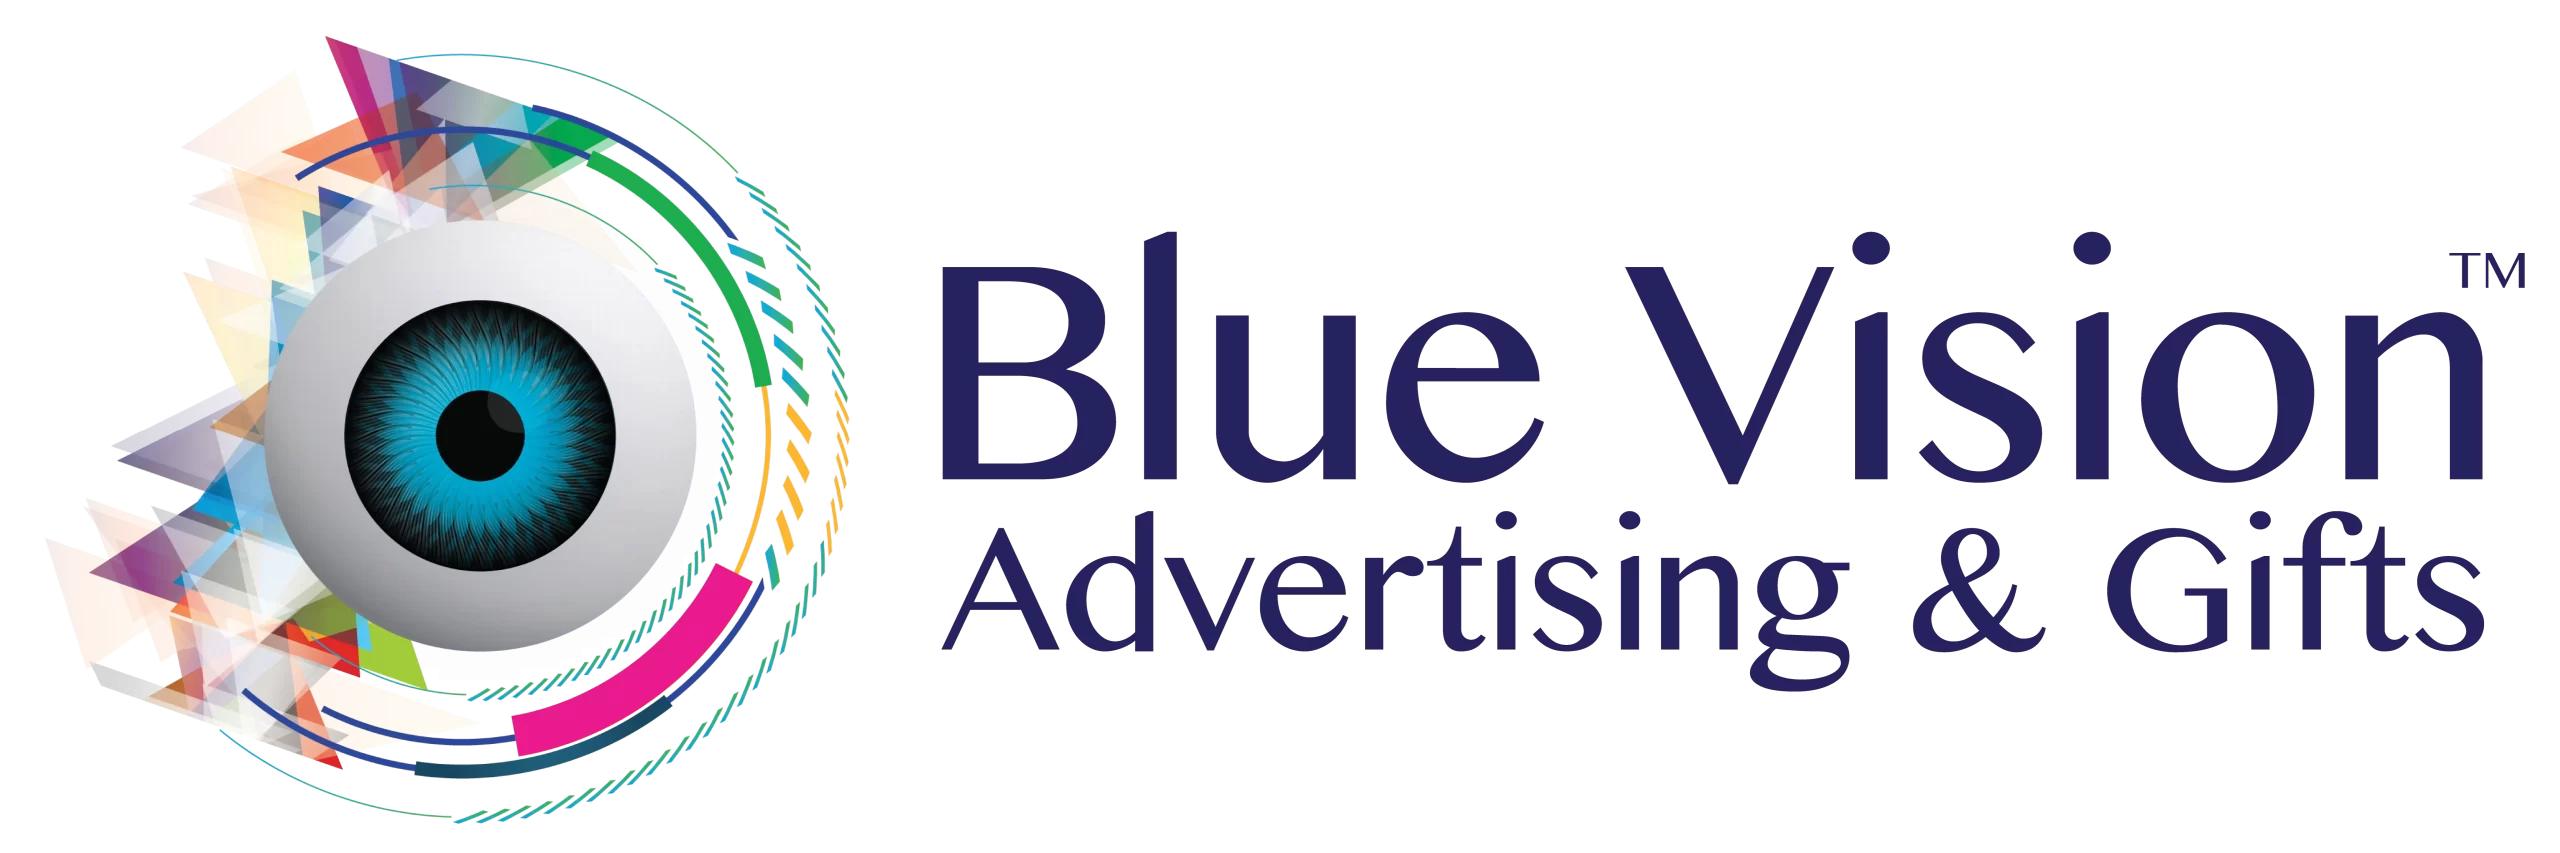 Blue Vision Advertising & Gift